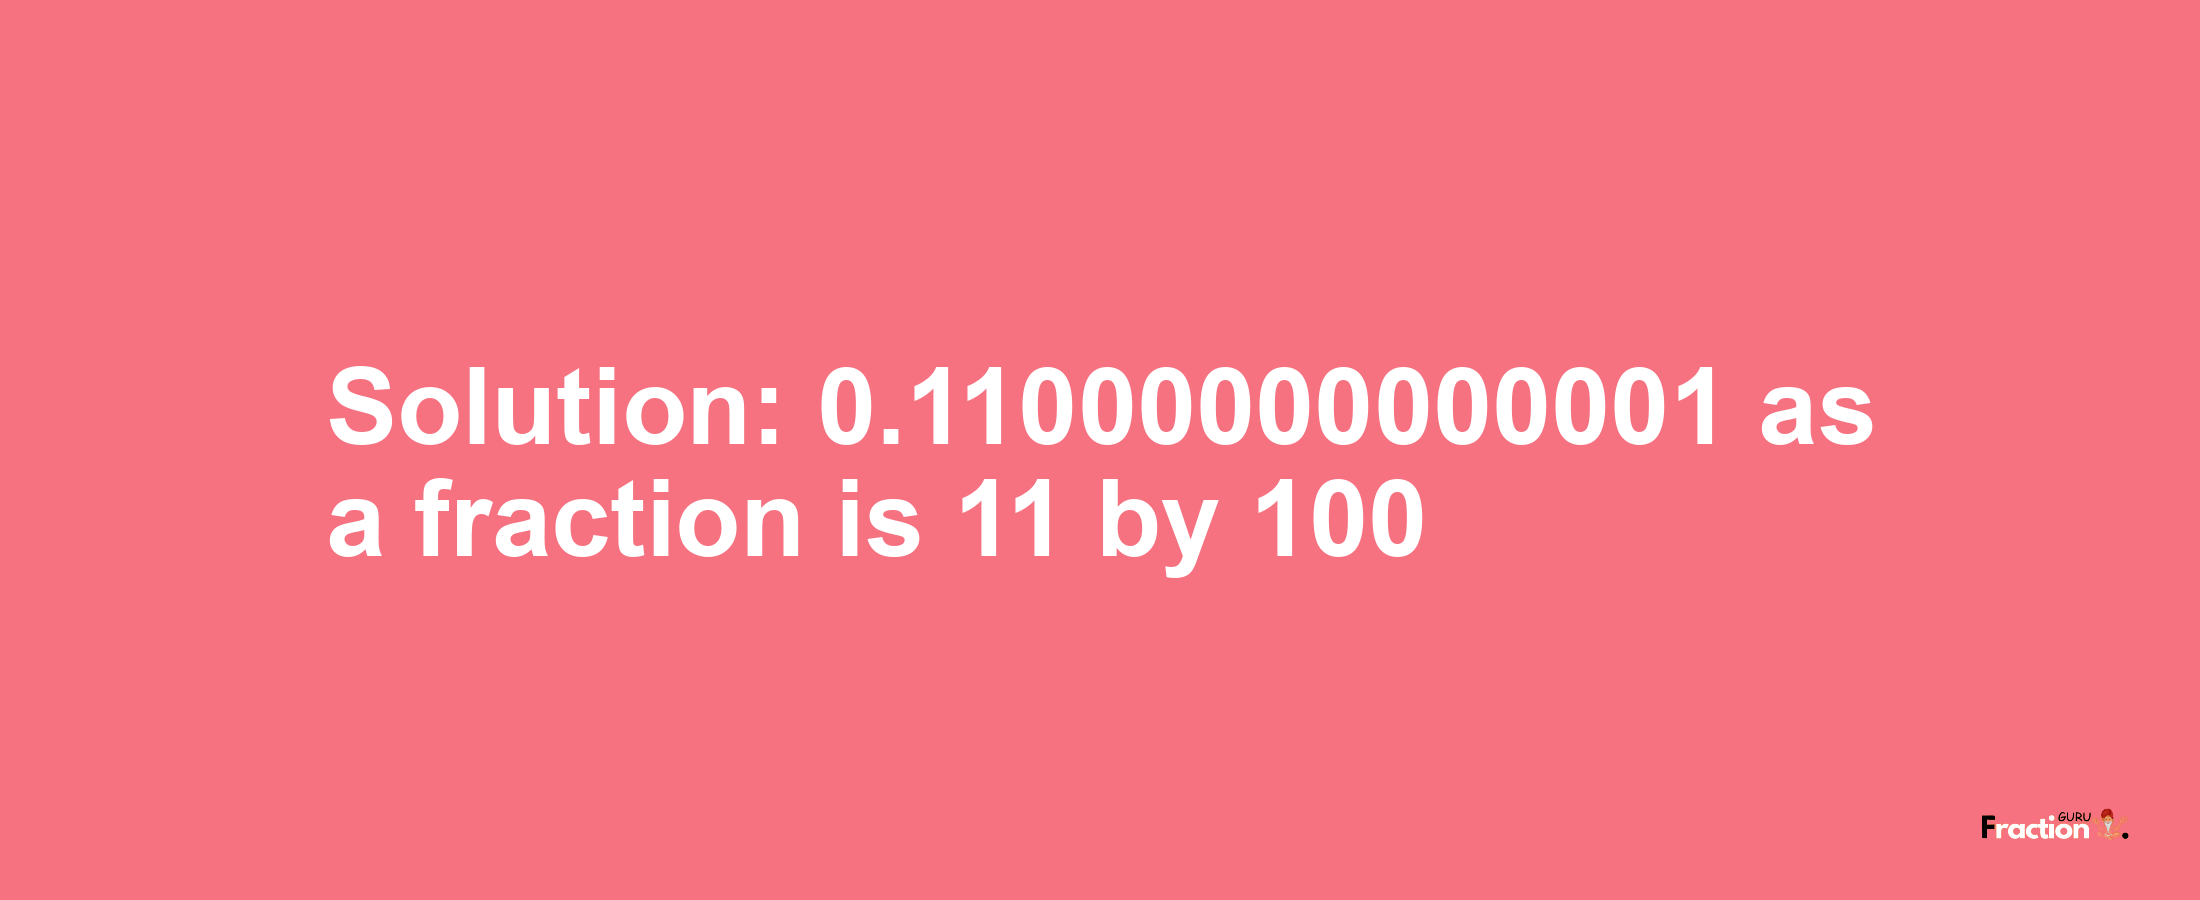 Solution:0.11000000000001 as a fraction is 11/100